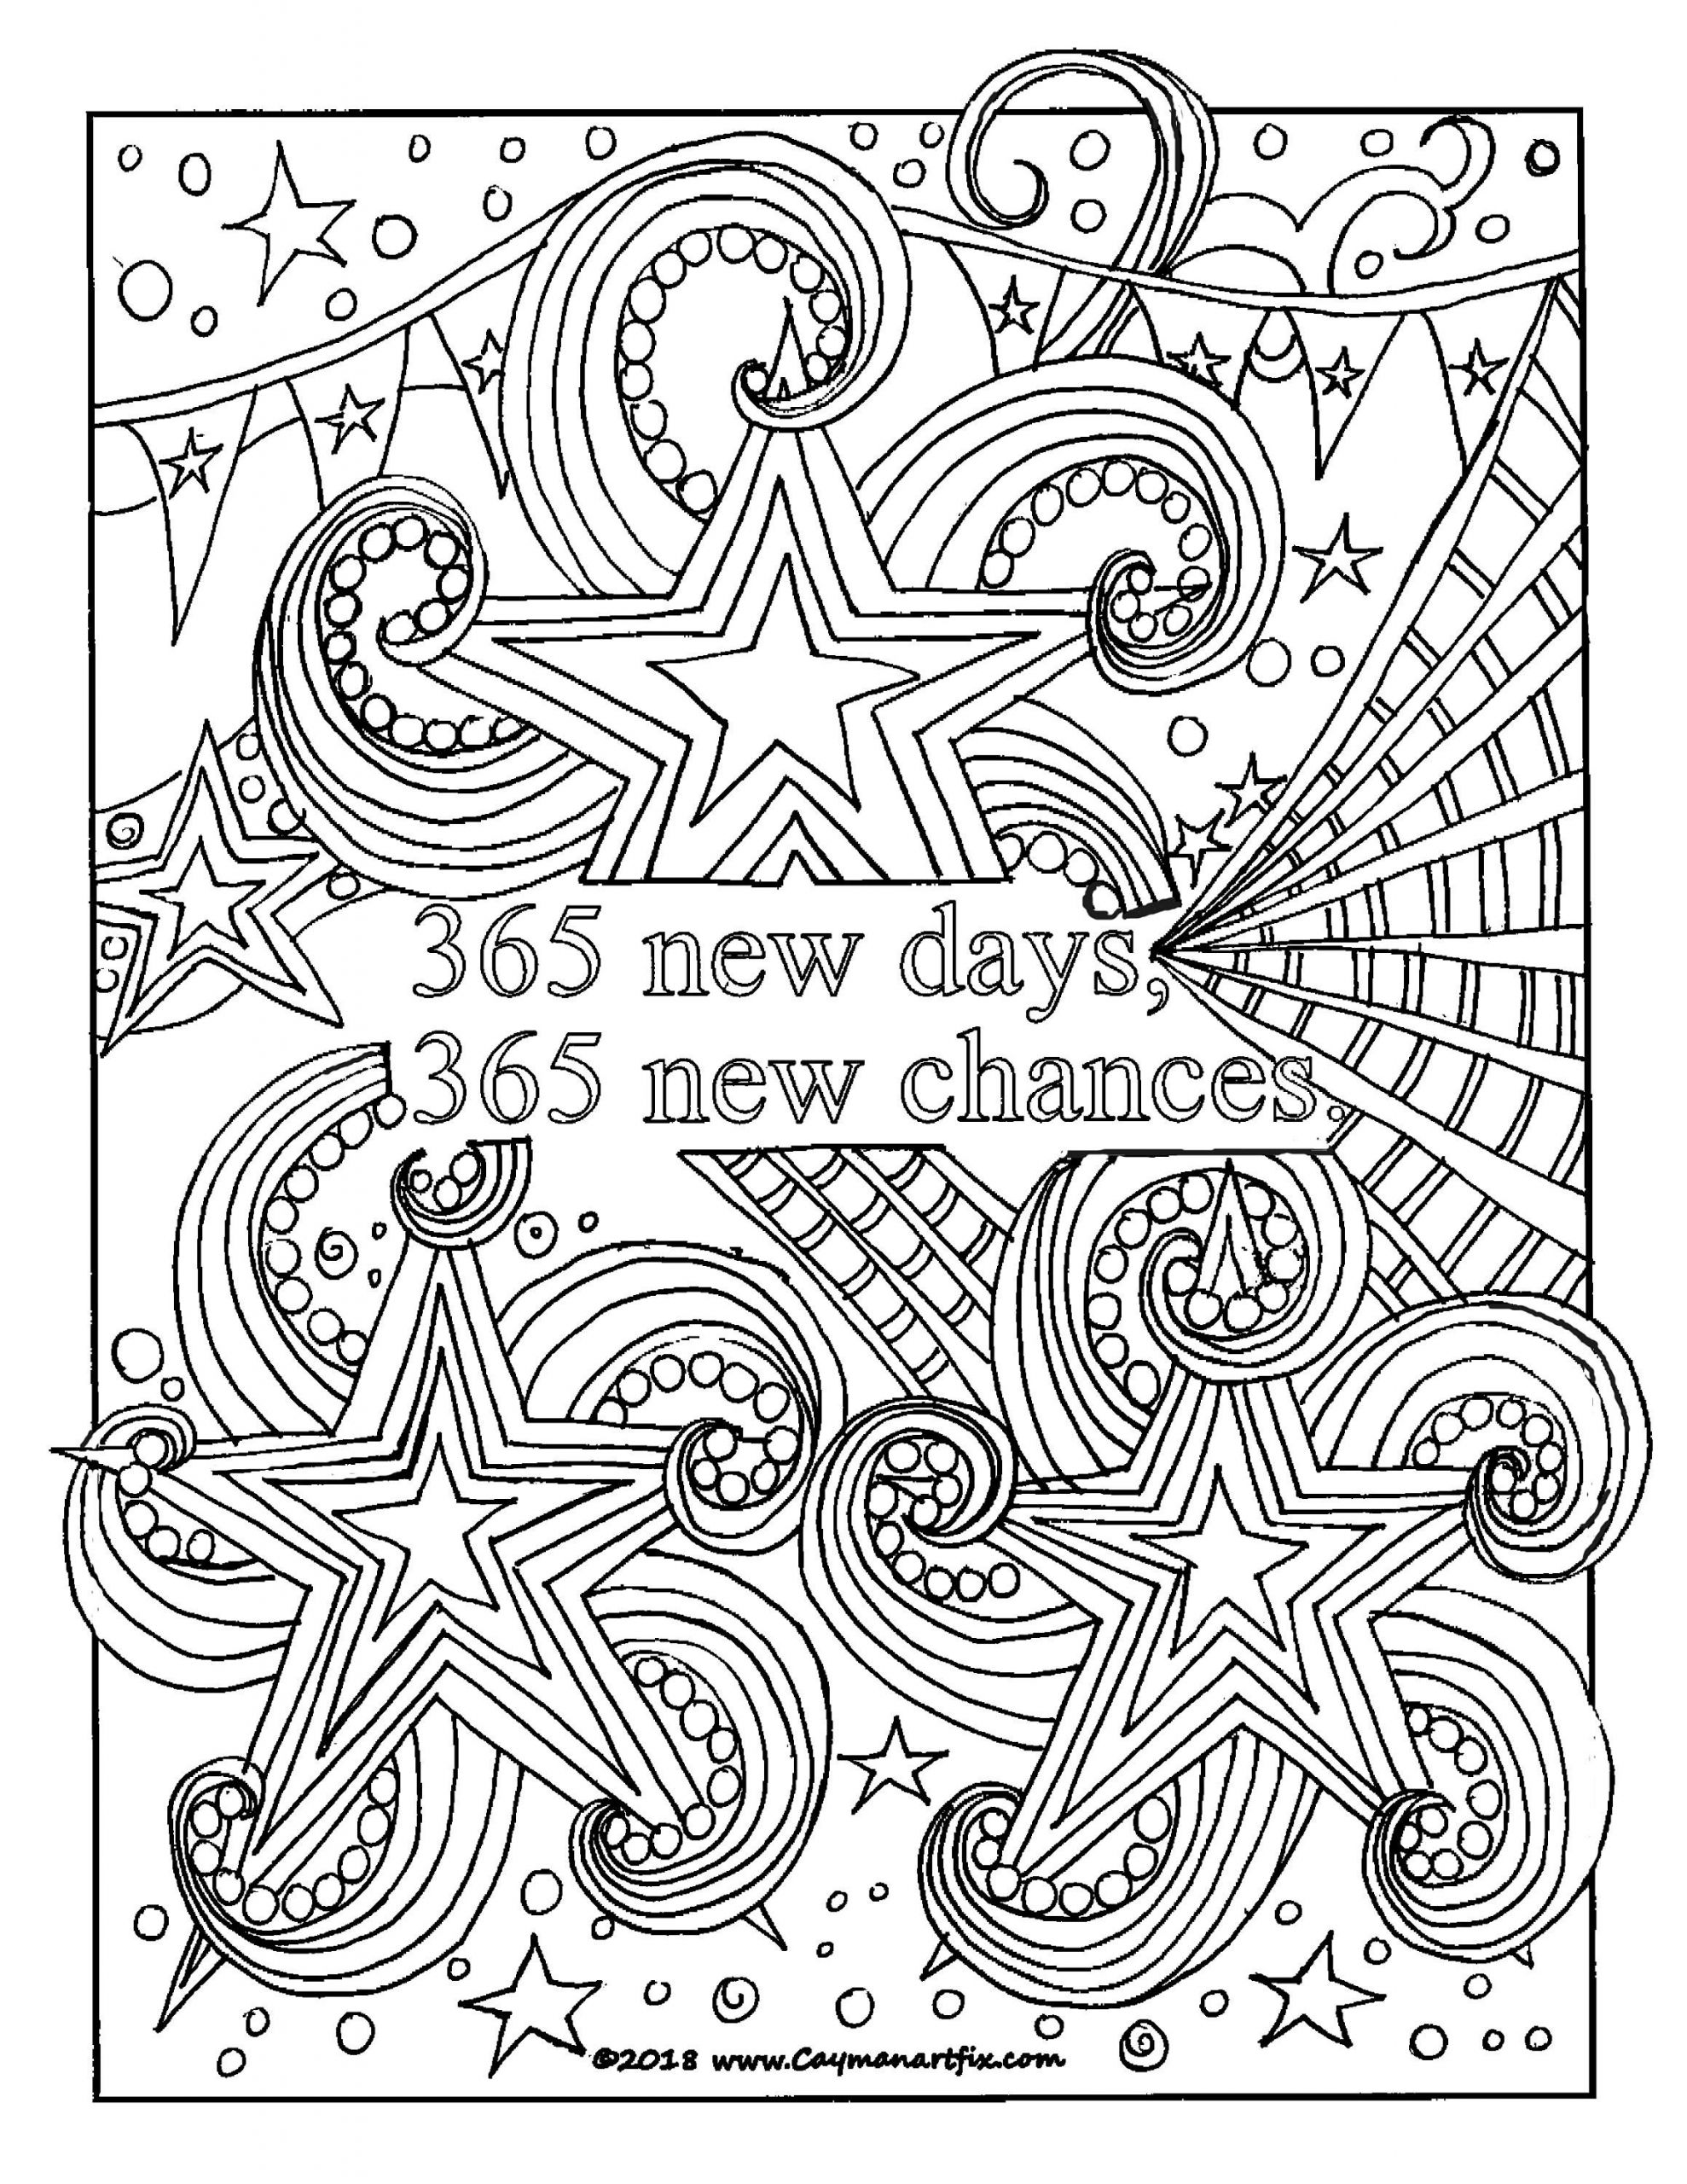 Adult Coloring Pages Quotes
 Inspirational quote coloring page motivational adult